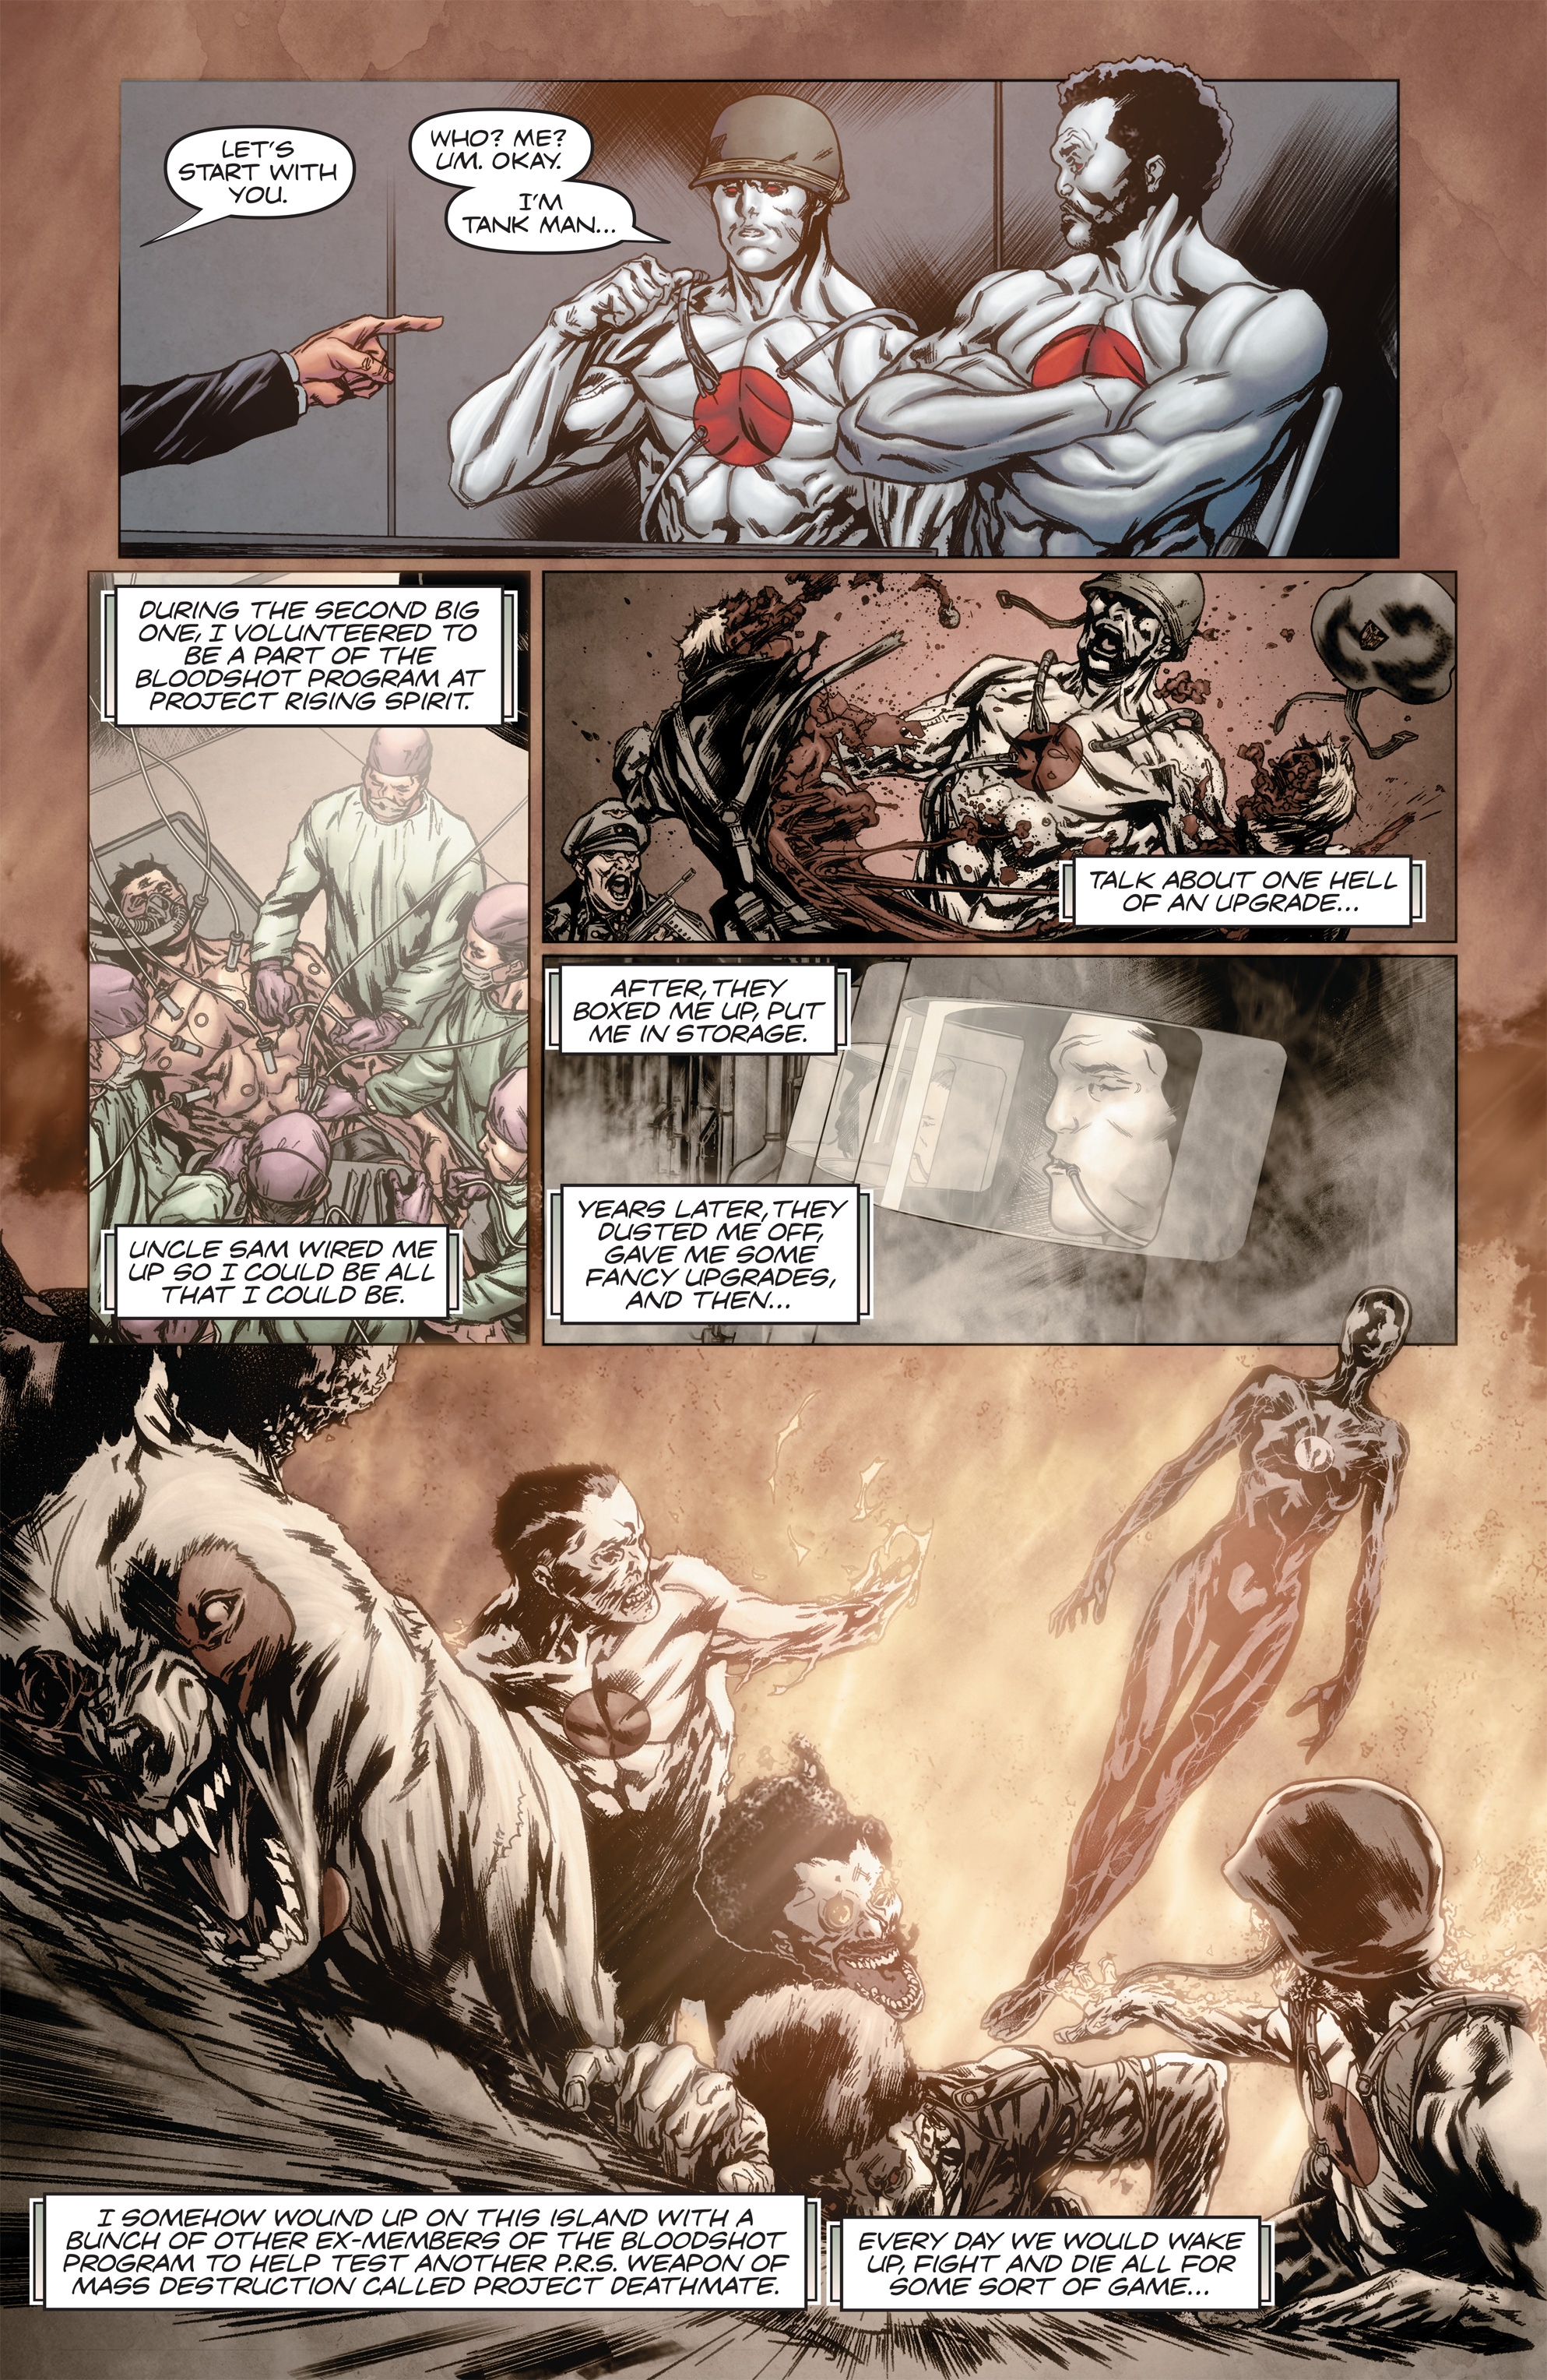 Bloodshot's Day Off (2017): Chapter 1 - Page 3